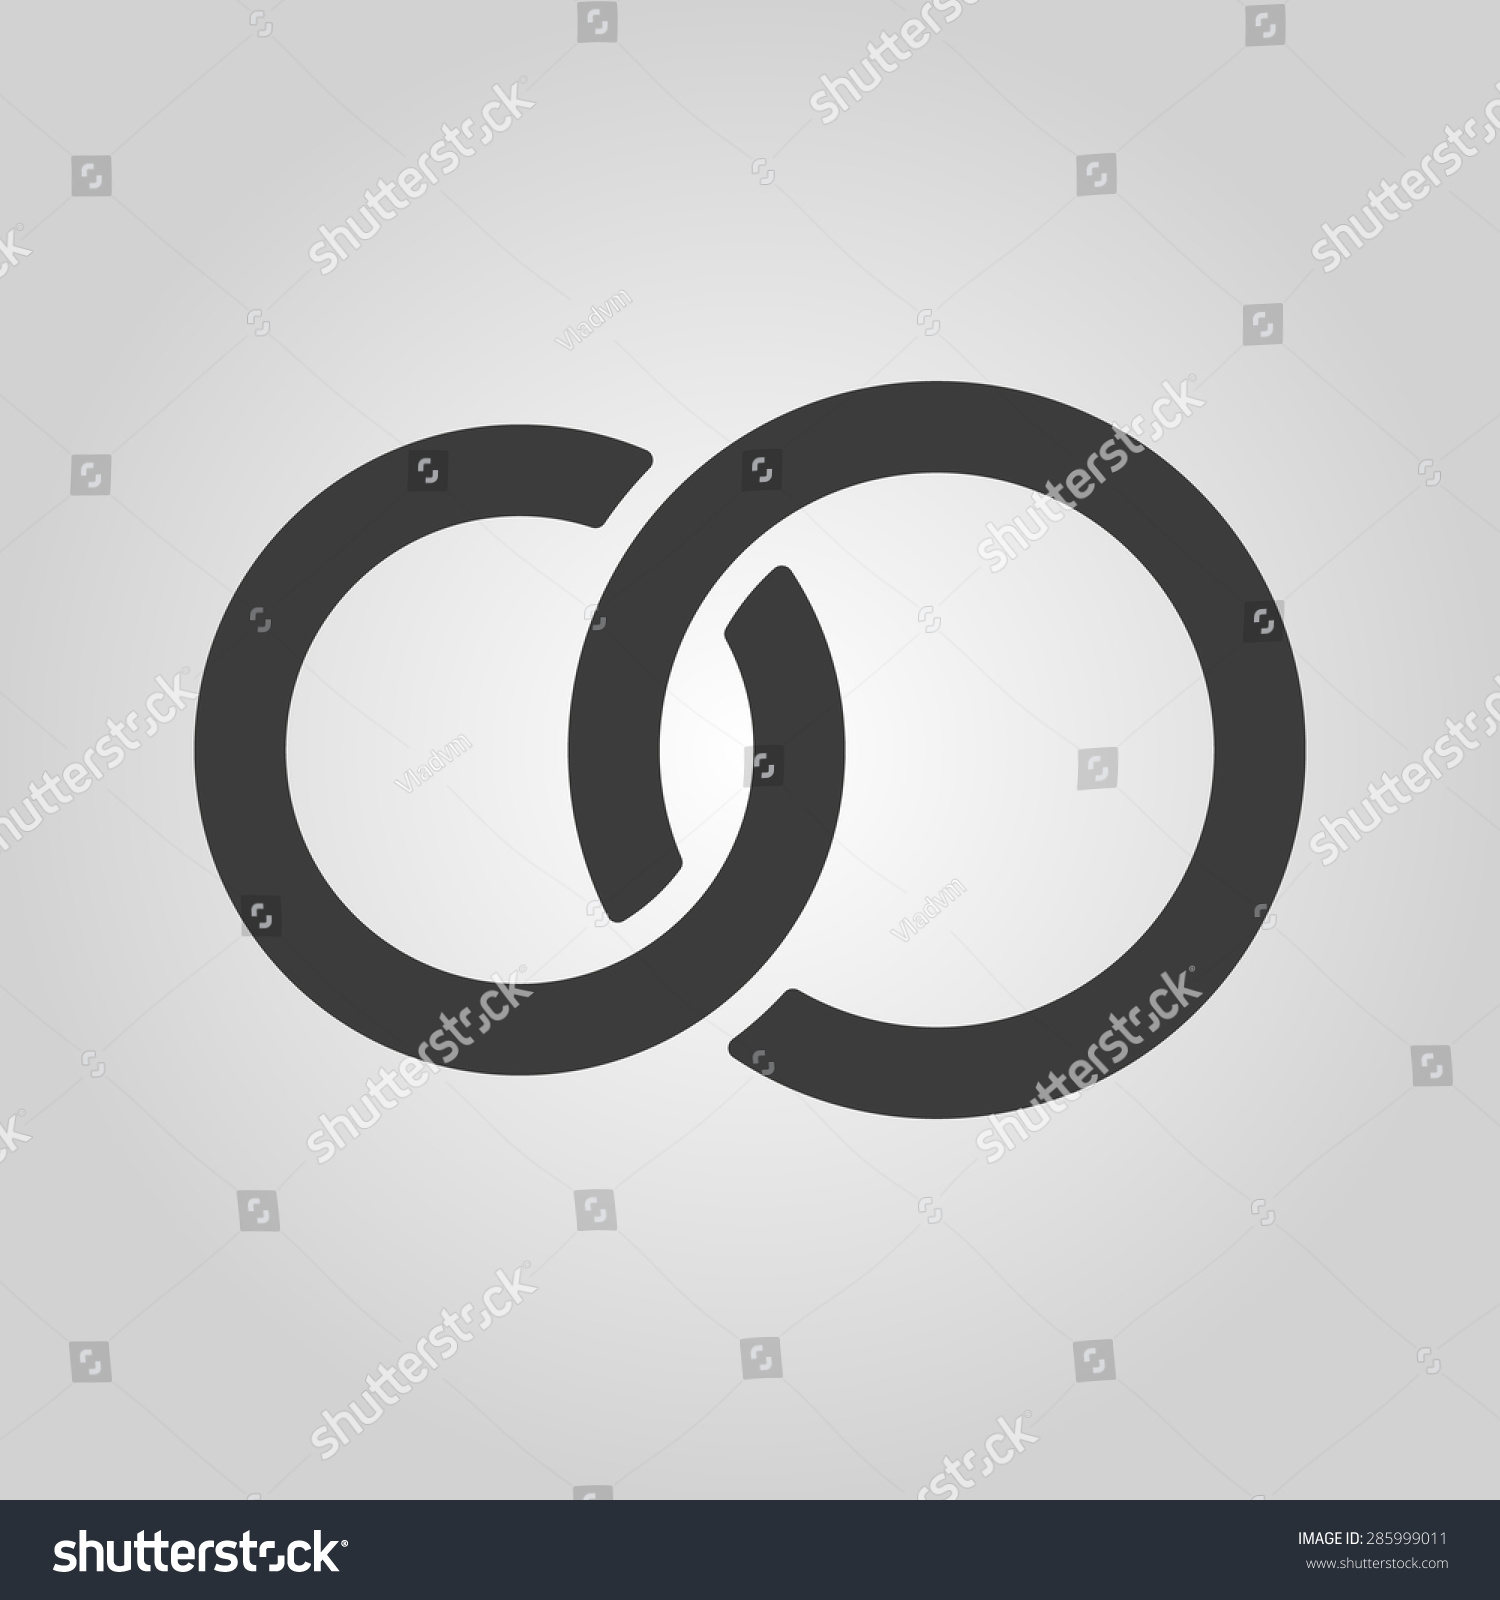 United Wedding Ring Icon Marriage Glans Stock Vector (Royalty Free ...